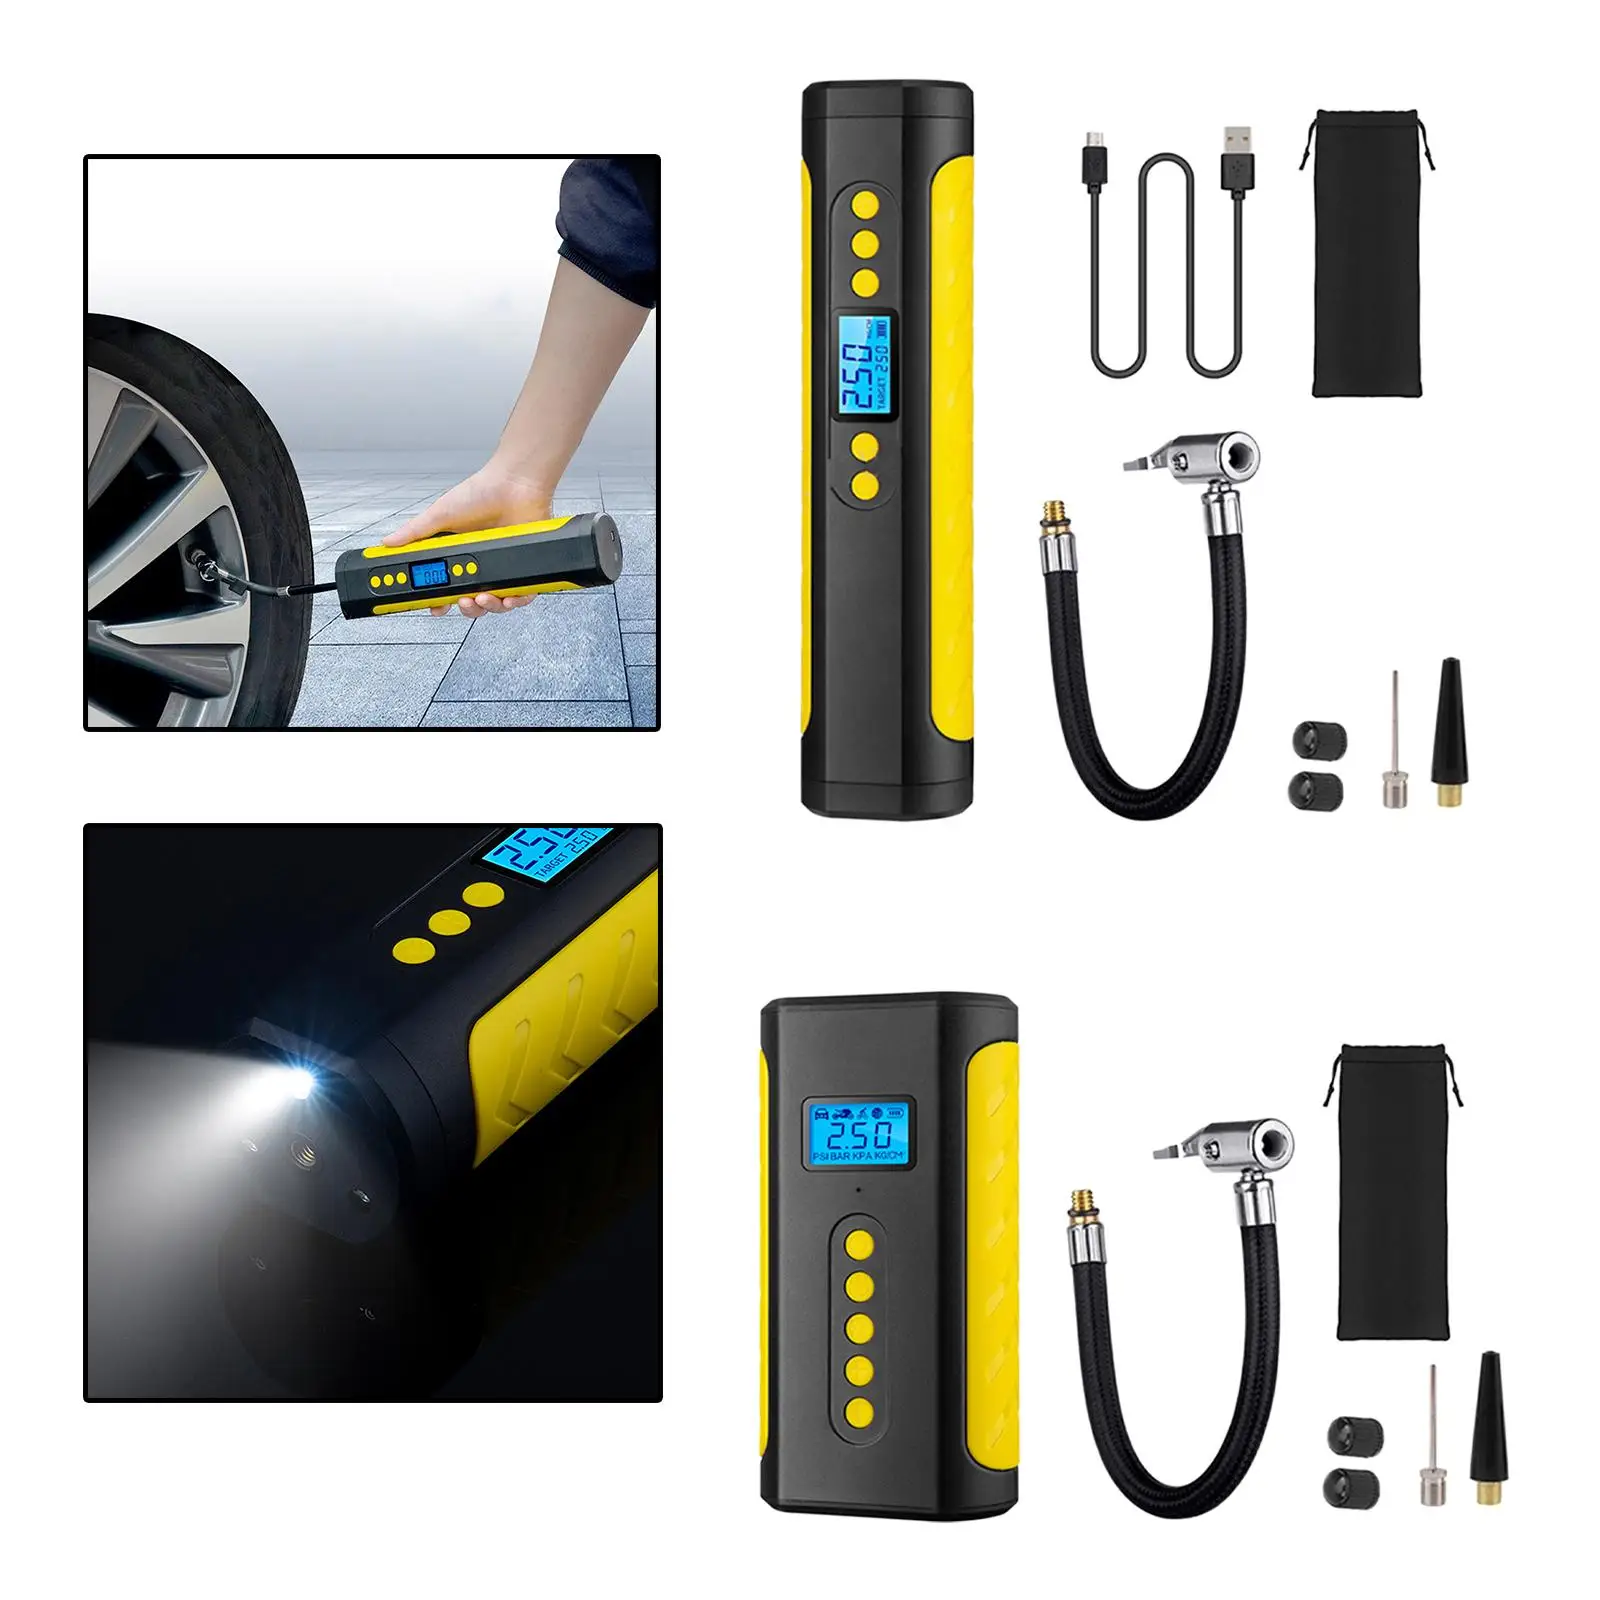 Mini Portable Air Compressor Fast Inflation Handheld Multi Functional Intelligent Air Pump for Truck Ball